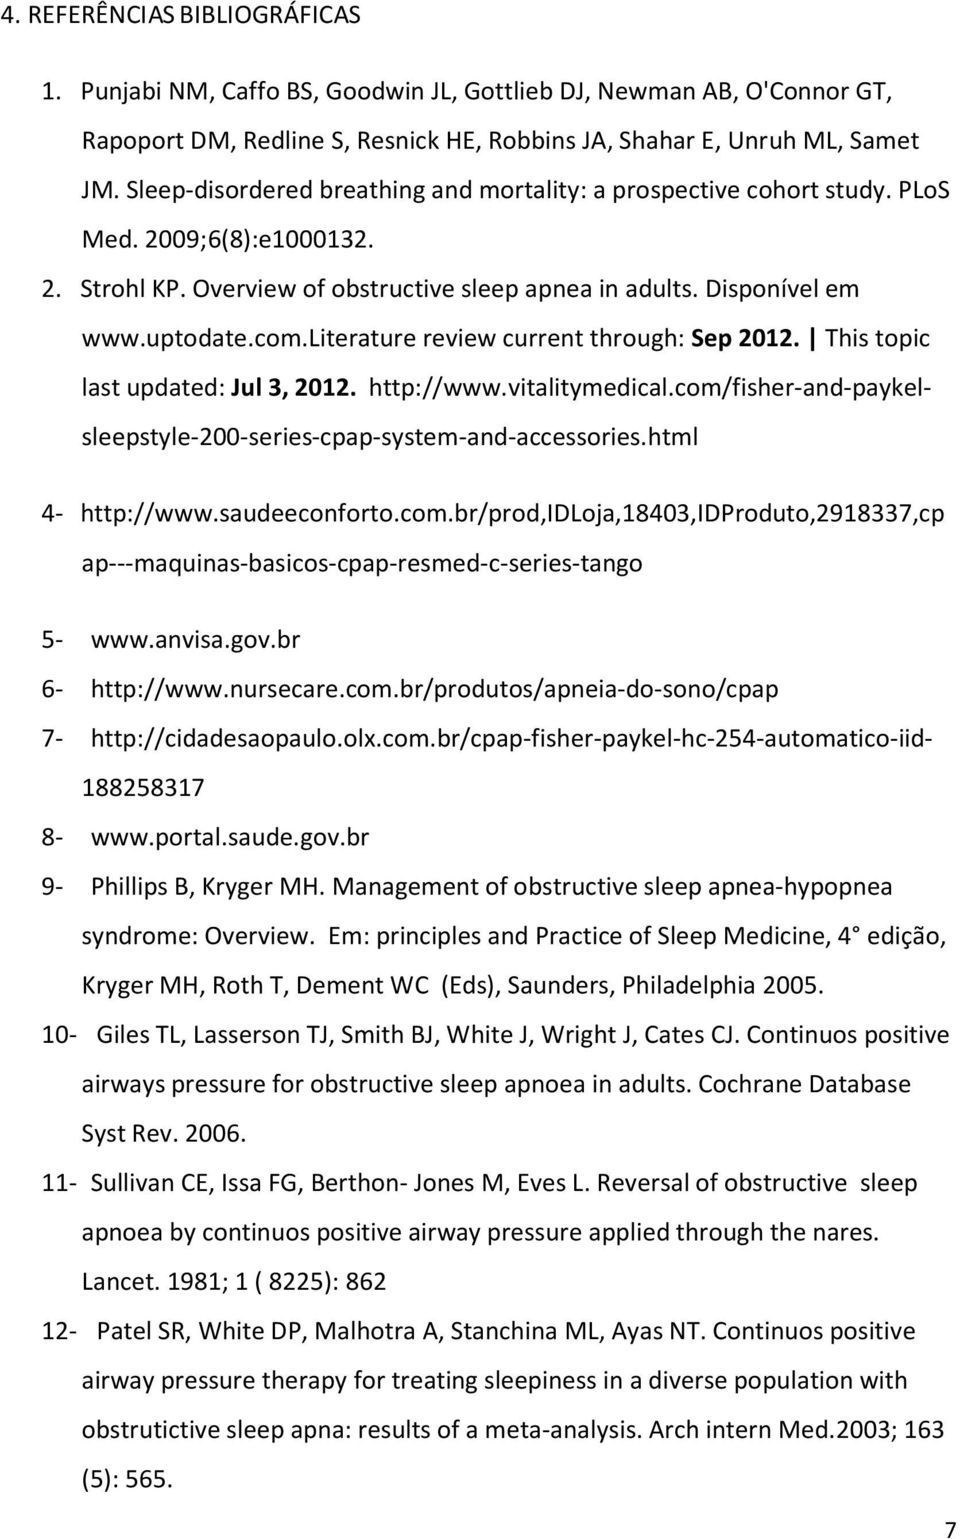 literature review current through: Sep 2012. This topic last updated: Jul 3, 2012. http://www.vitalitymedical.com/fisher-and-paykelsleepstyle-200-series-cpap-system-and-accessories.html 4- http://www.